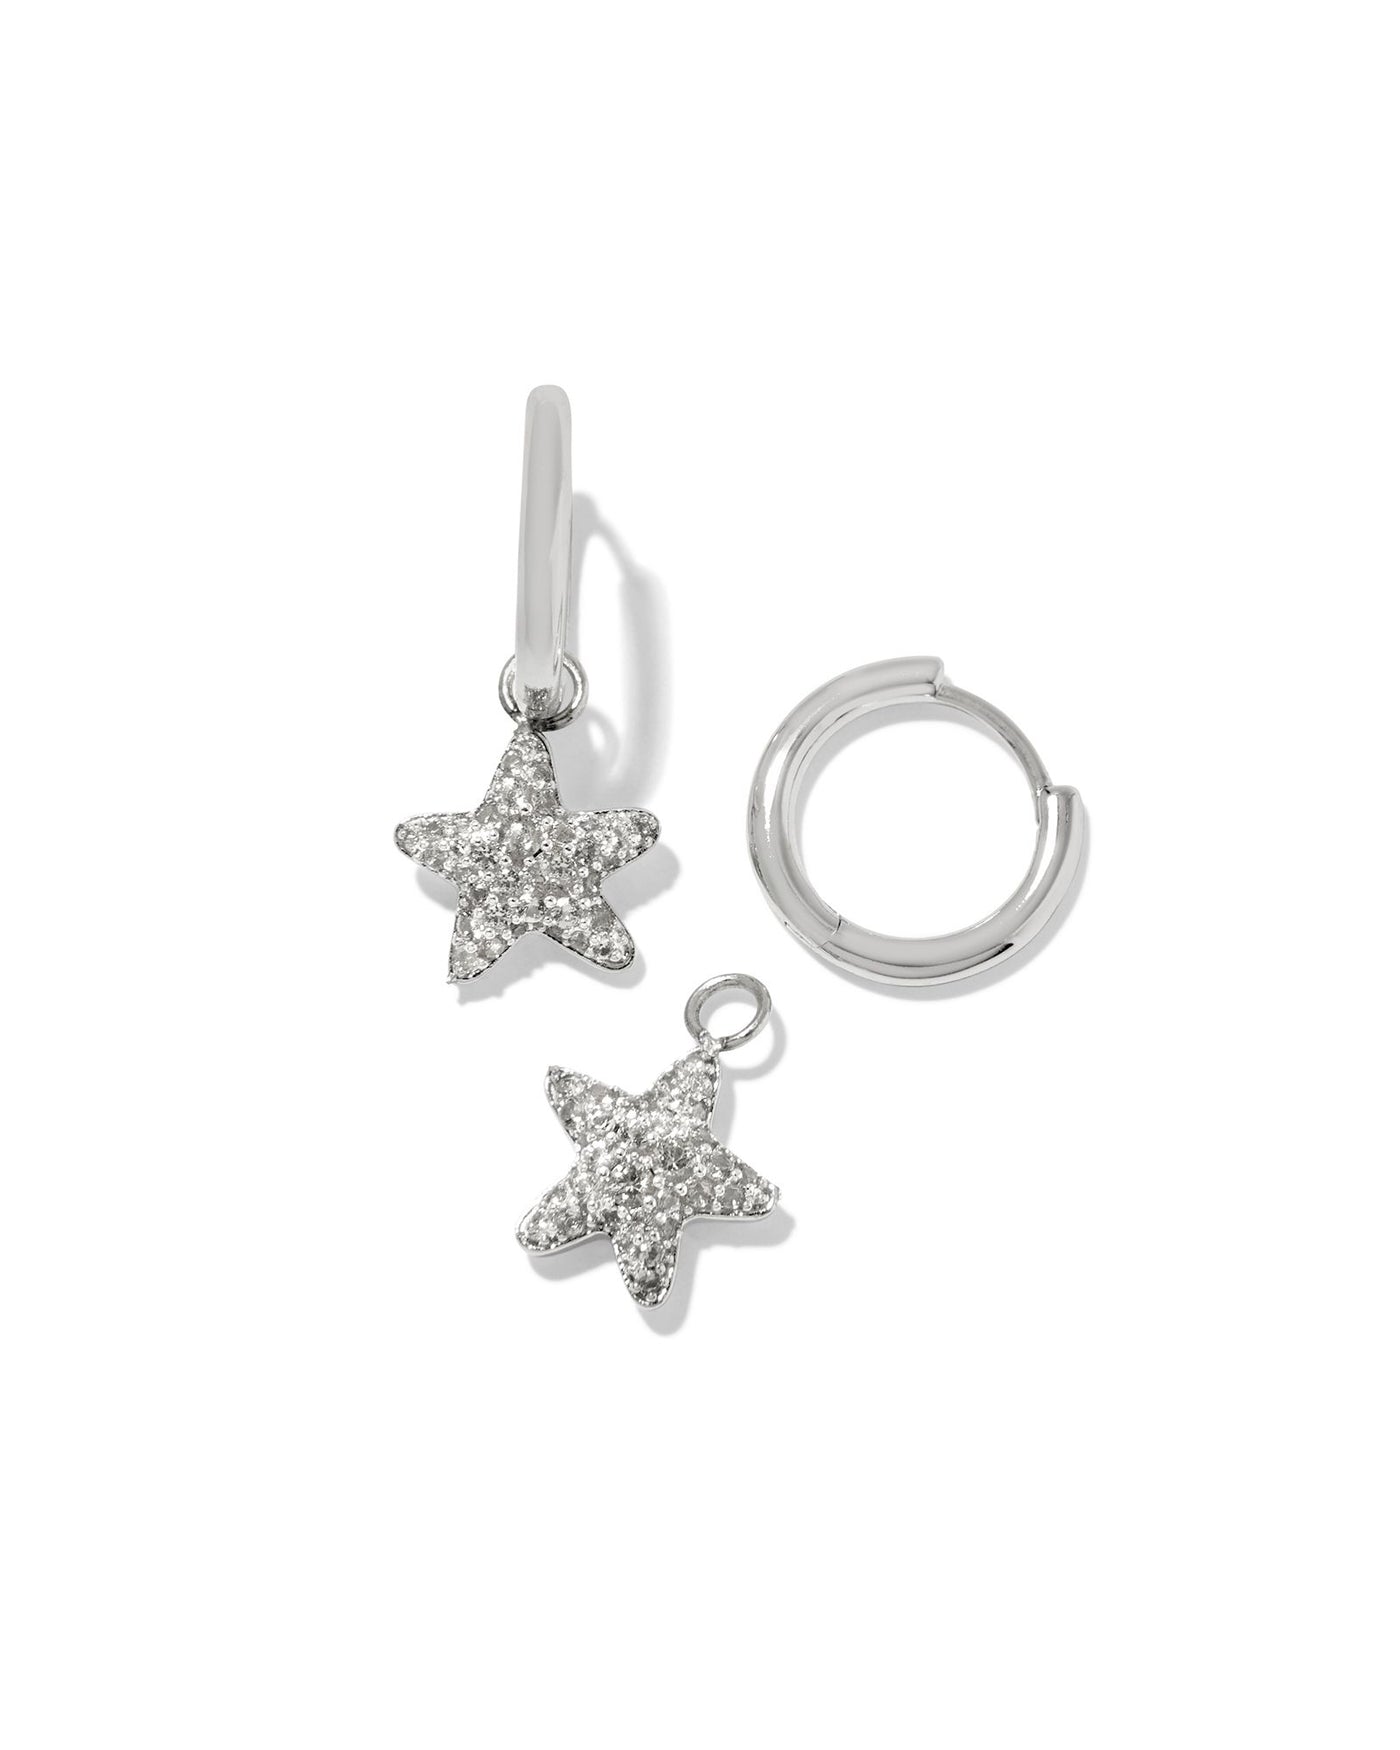 Kendra Scott Jae Star Pave Huggies in Silver White Crystal with star charm detached.